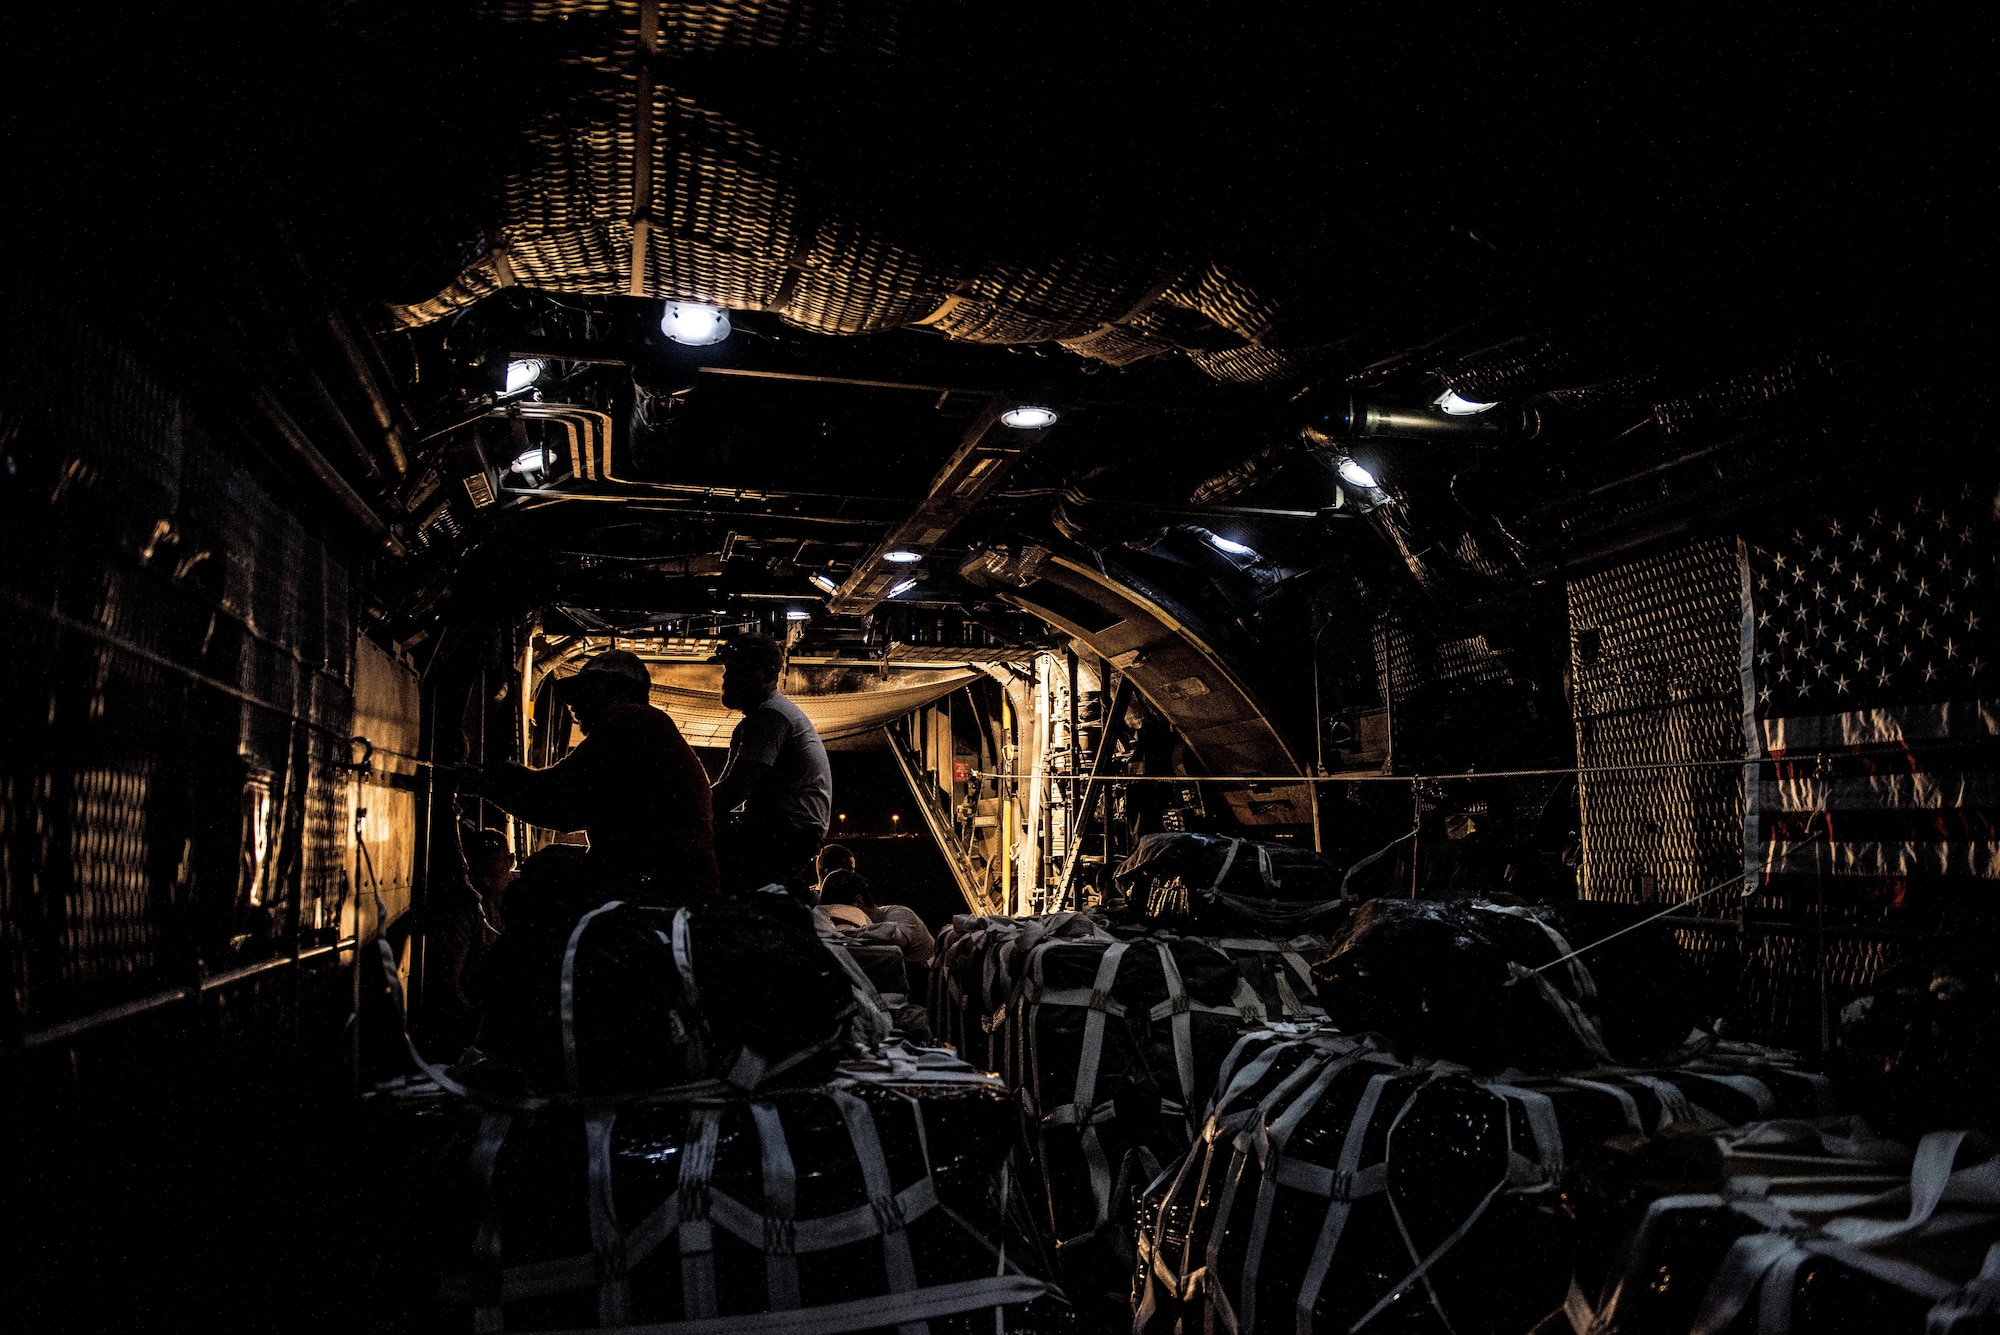 U.S. Army Staff Sgt. Jose Moreno (left), a parachute rigger assigned to the 294th Quartermaster Company, attaches static line rigging on an airdrop bundle in the rear of a C-130 aircraft at an undisclosed location in Southwest Asia, Sept. 10, 2017. Airdrop bundles are rigged within specific guidelines to ensure the cargo properly exits the aircraft, the parachute properly deploys and the bundle lands intact on its target. (U.S. Air Force photo by Tech. Sgt. Jonathan Hehnly)